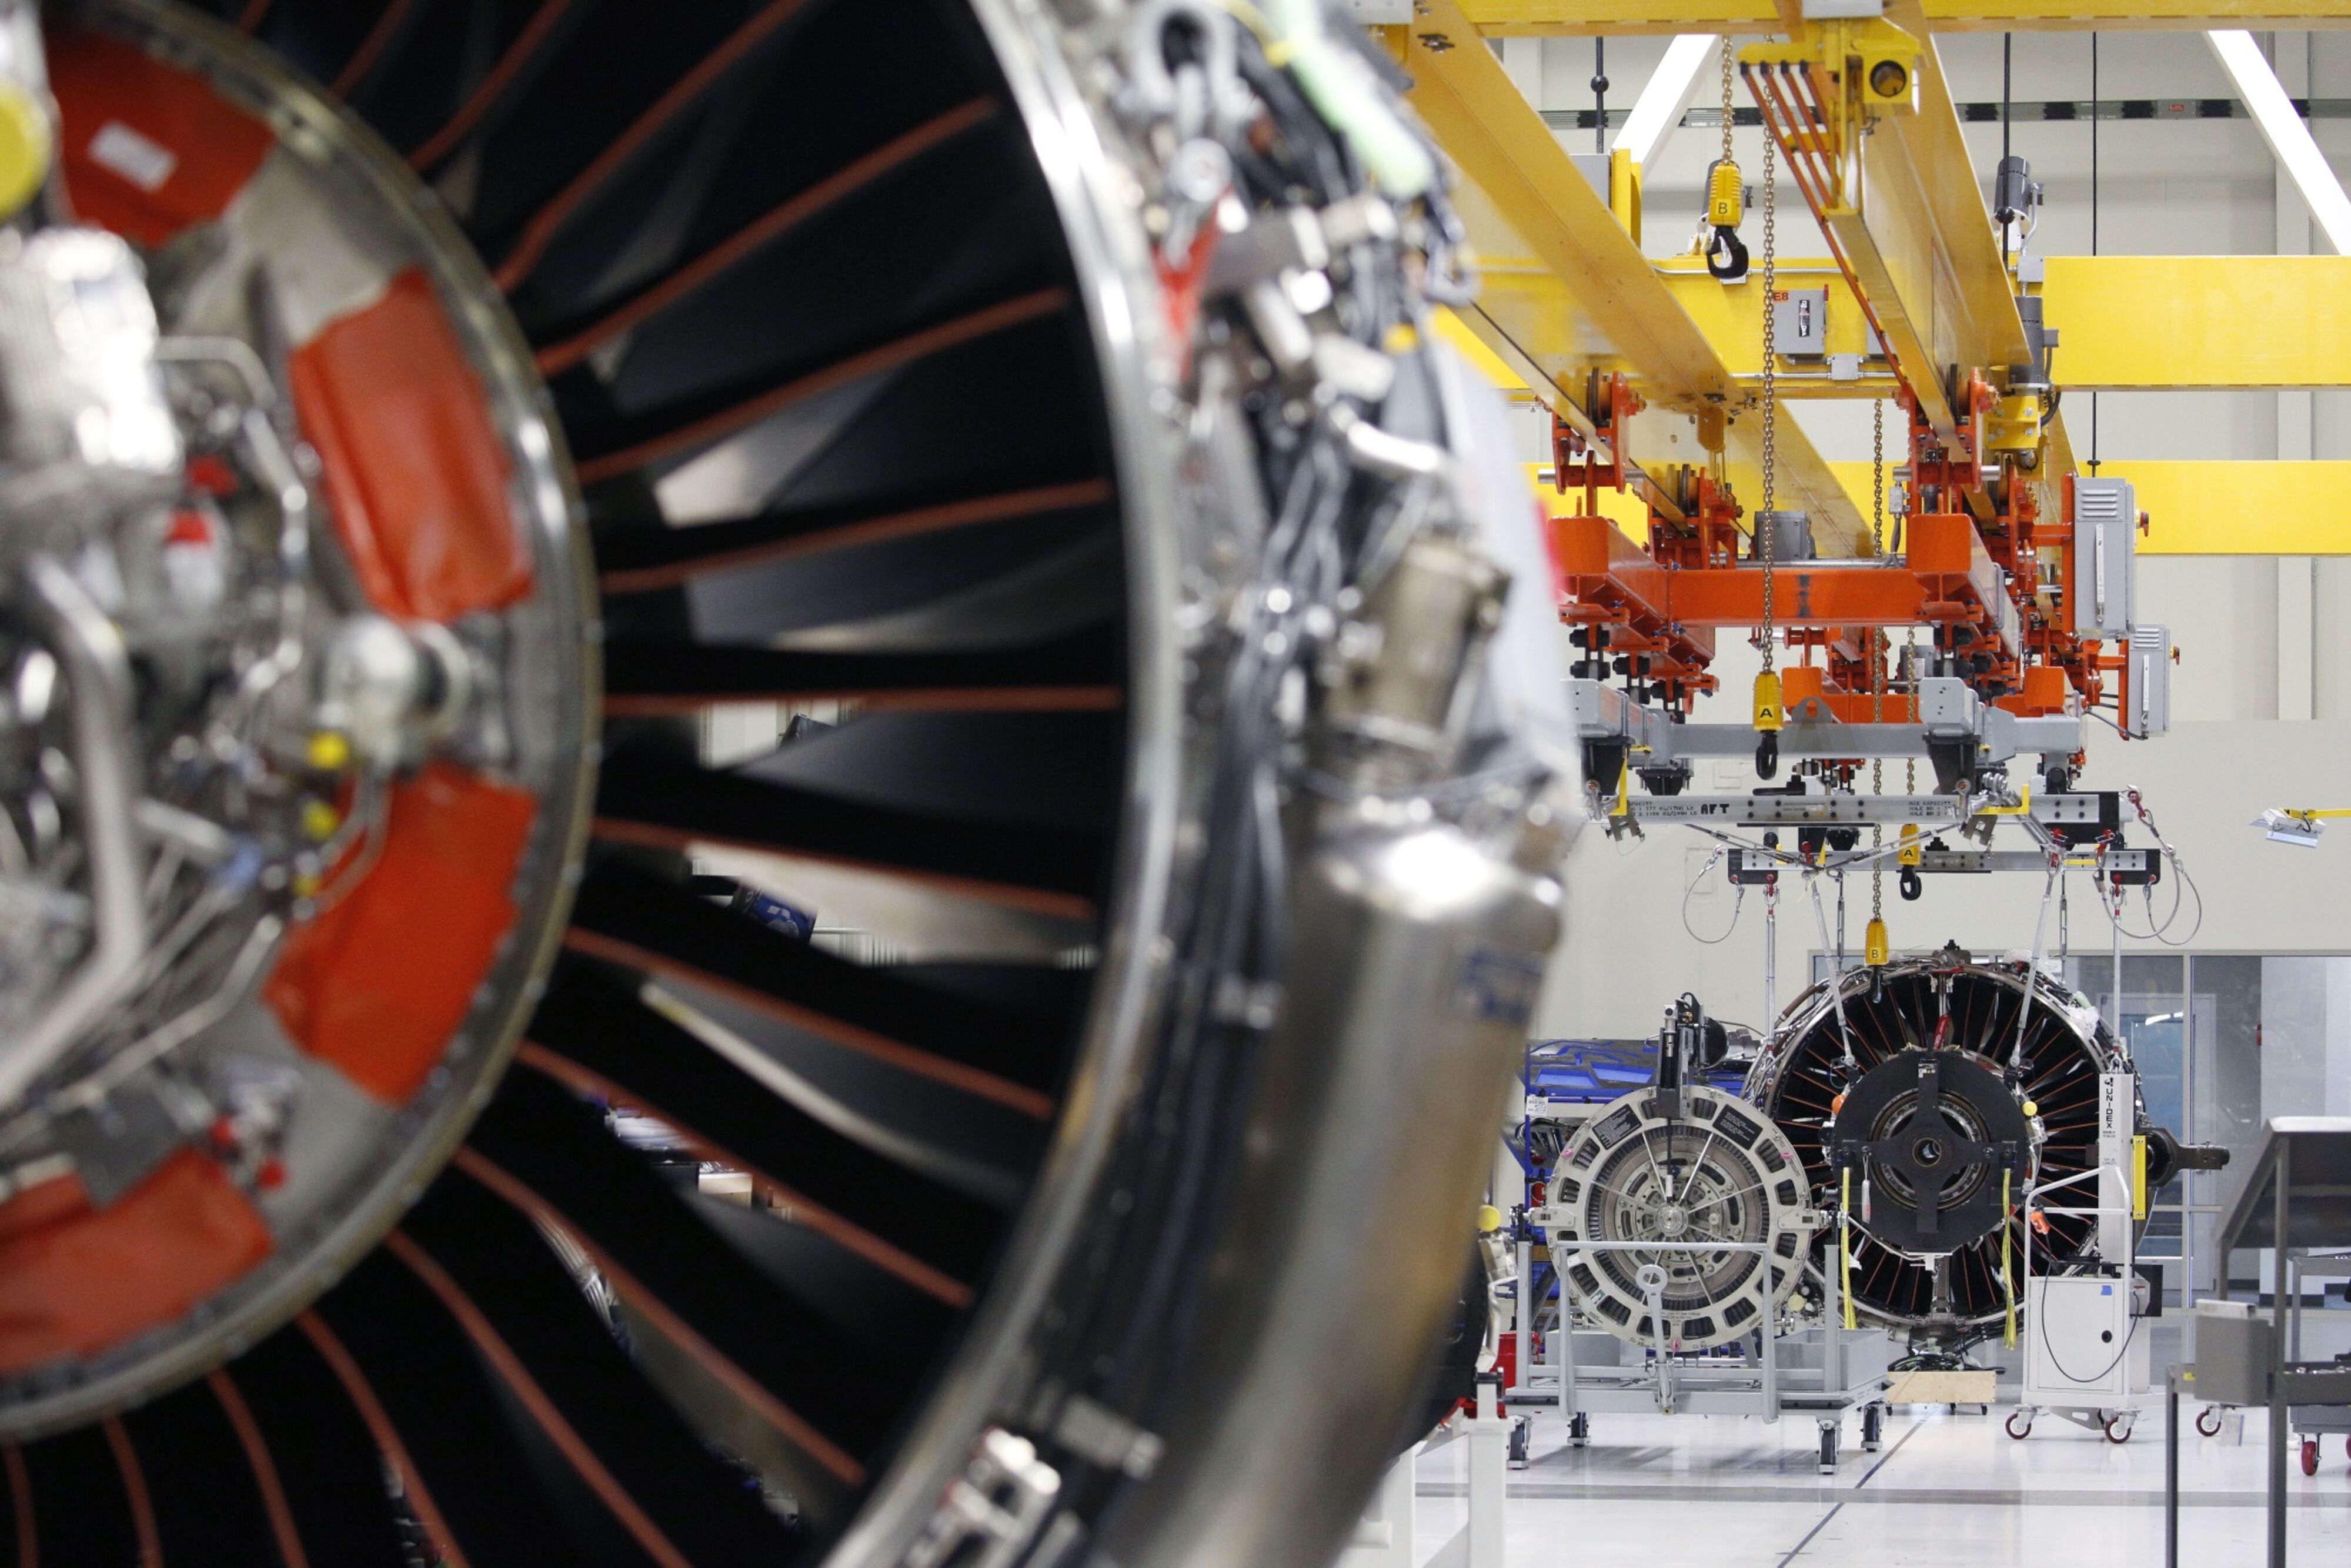 LEAP jet engines are seen on the factory floor of the General Electric Co. (GE) Aviation assembly plant in Lafayette, Indiana, U.S., on Friday, July 19, 2019. General Electric is scheduled to release earnings figures on July 31.